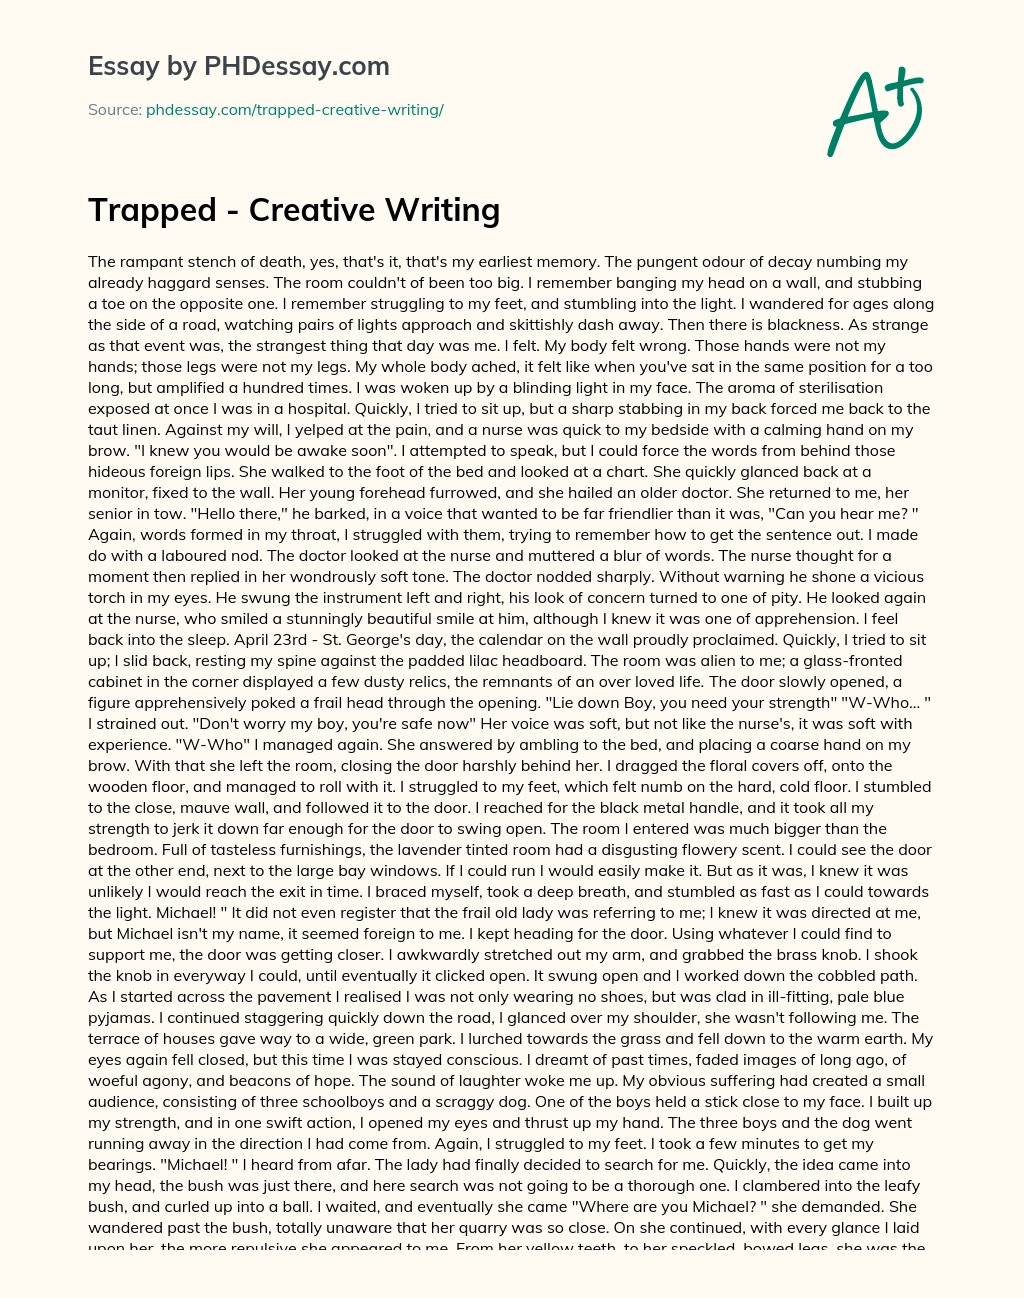 Trapped – Creative Writing essay